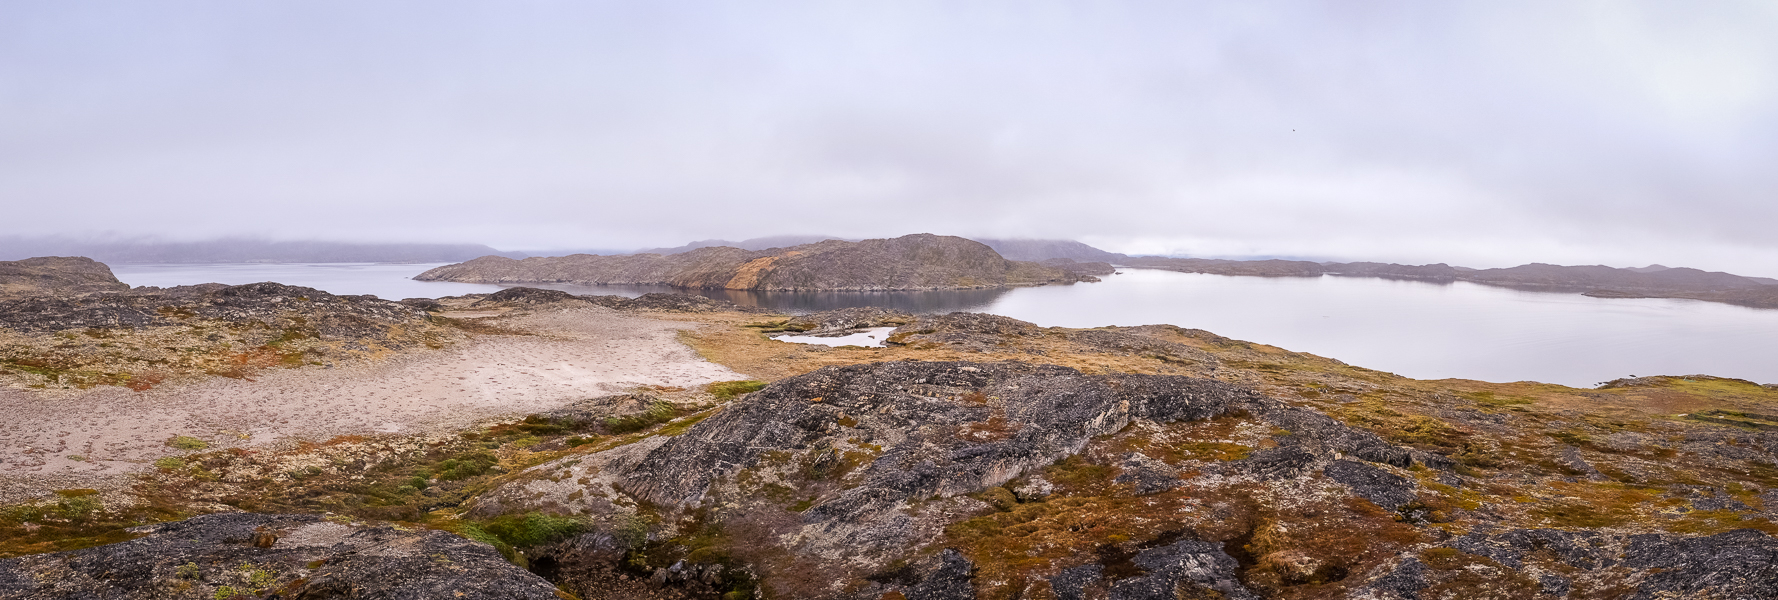 Panorama from the top of Nipisat Island near Sisimiut in West Greenland